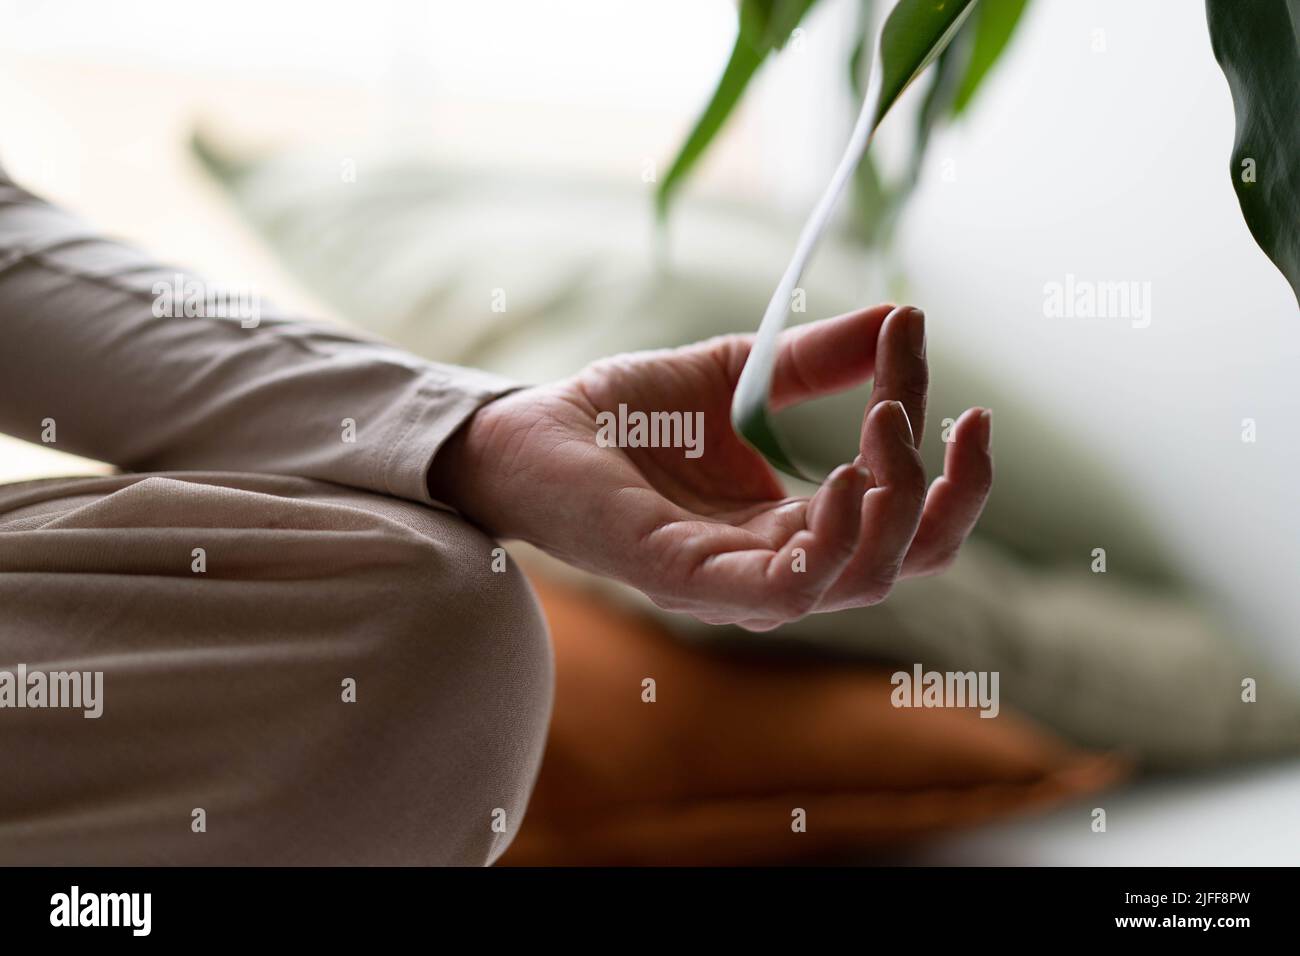 Close-up photo, front view, of a girl doing giyana mudra in meditation. Home interior, concept of yoga, pacification, self-discovery. Stock Photo